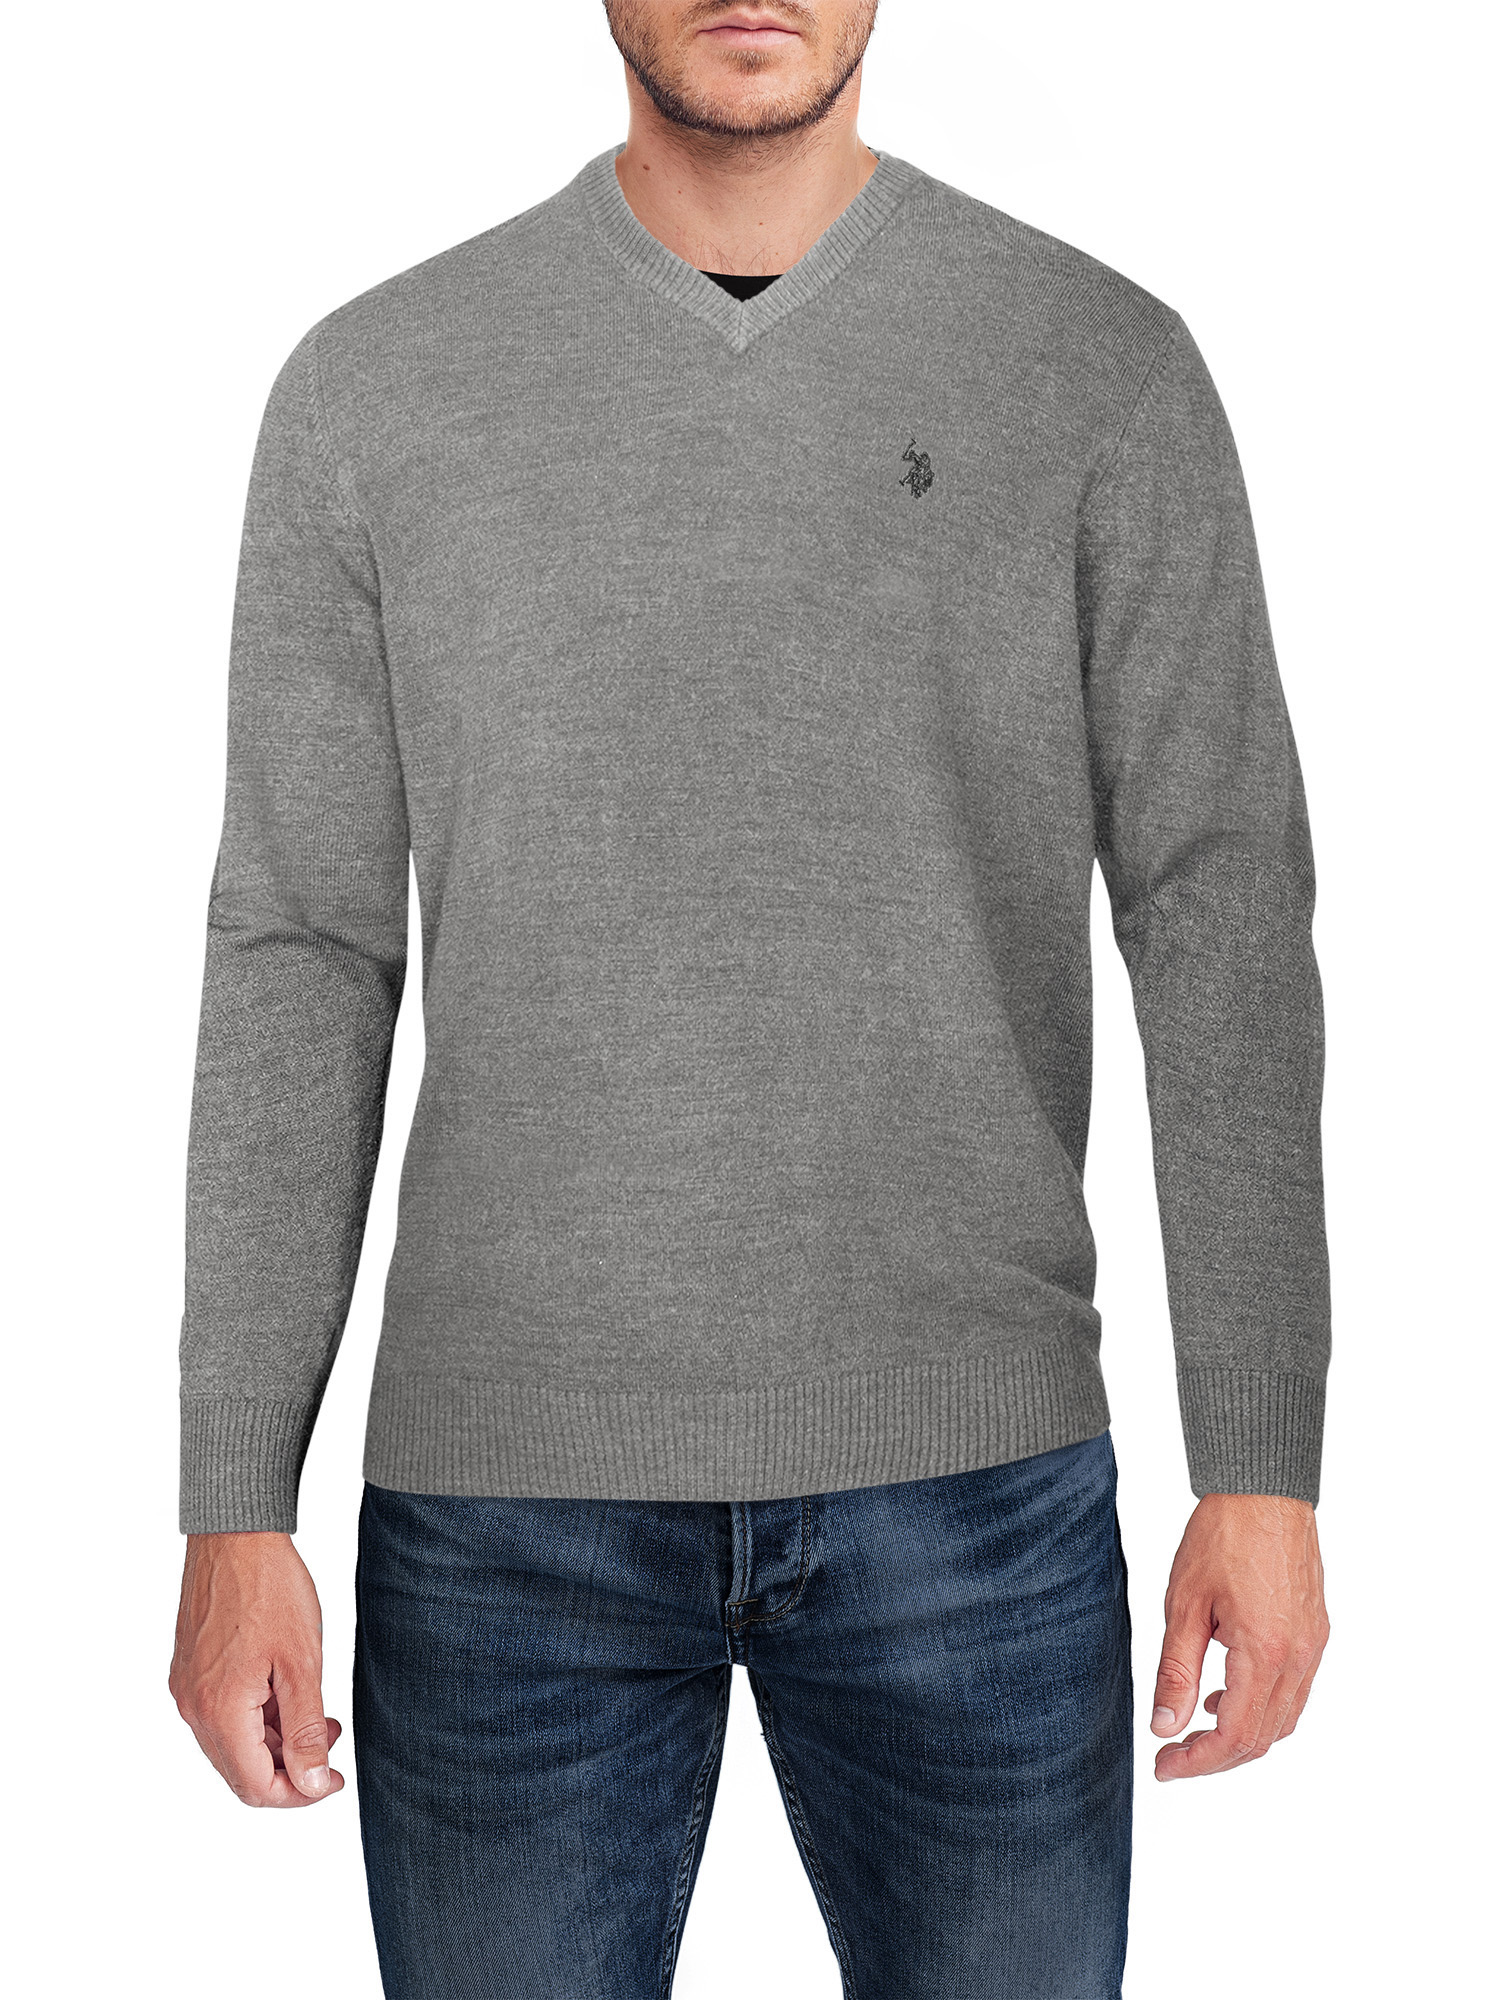 U.S. Polo Assn. Men's Jersey V-Neck Sweater - image 1 of 2